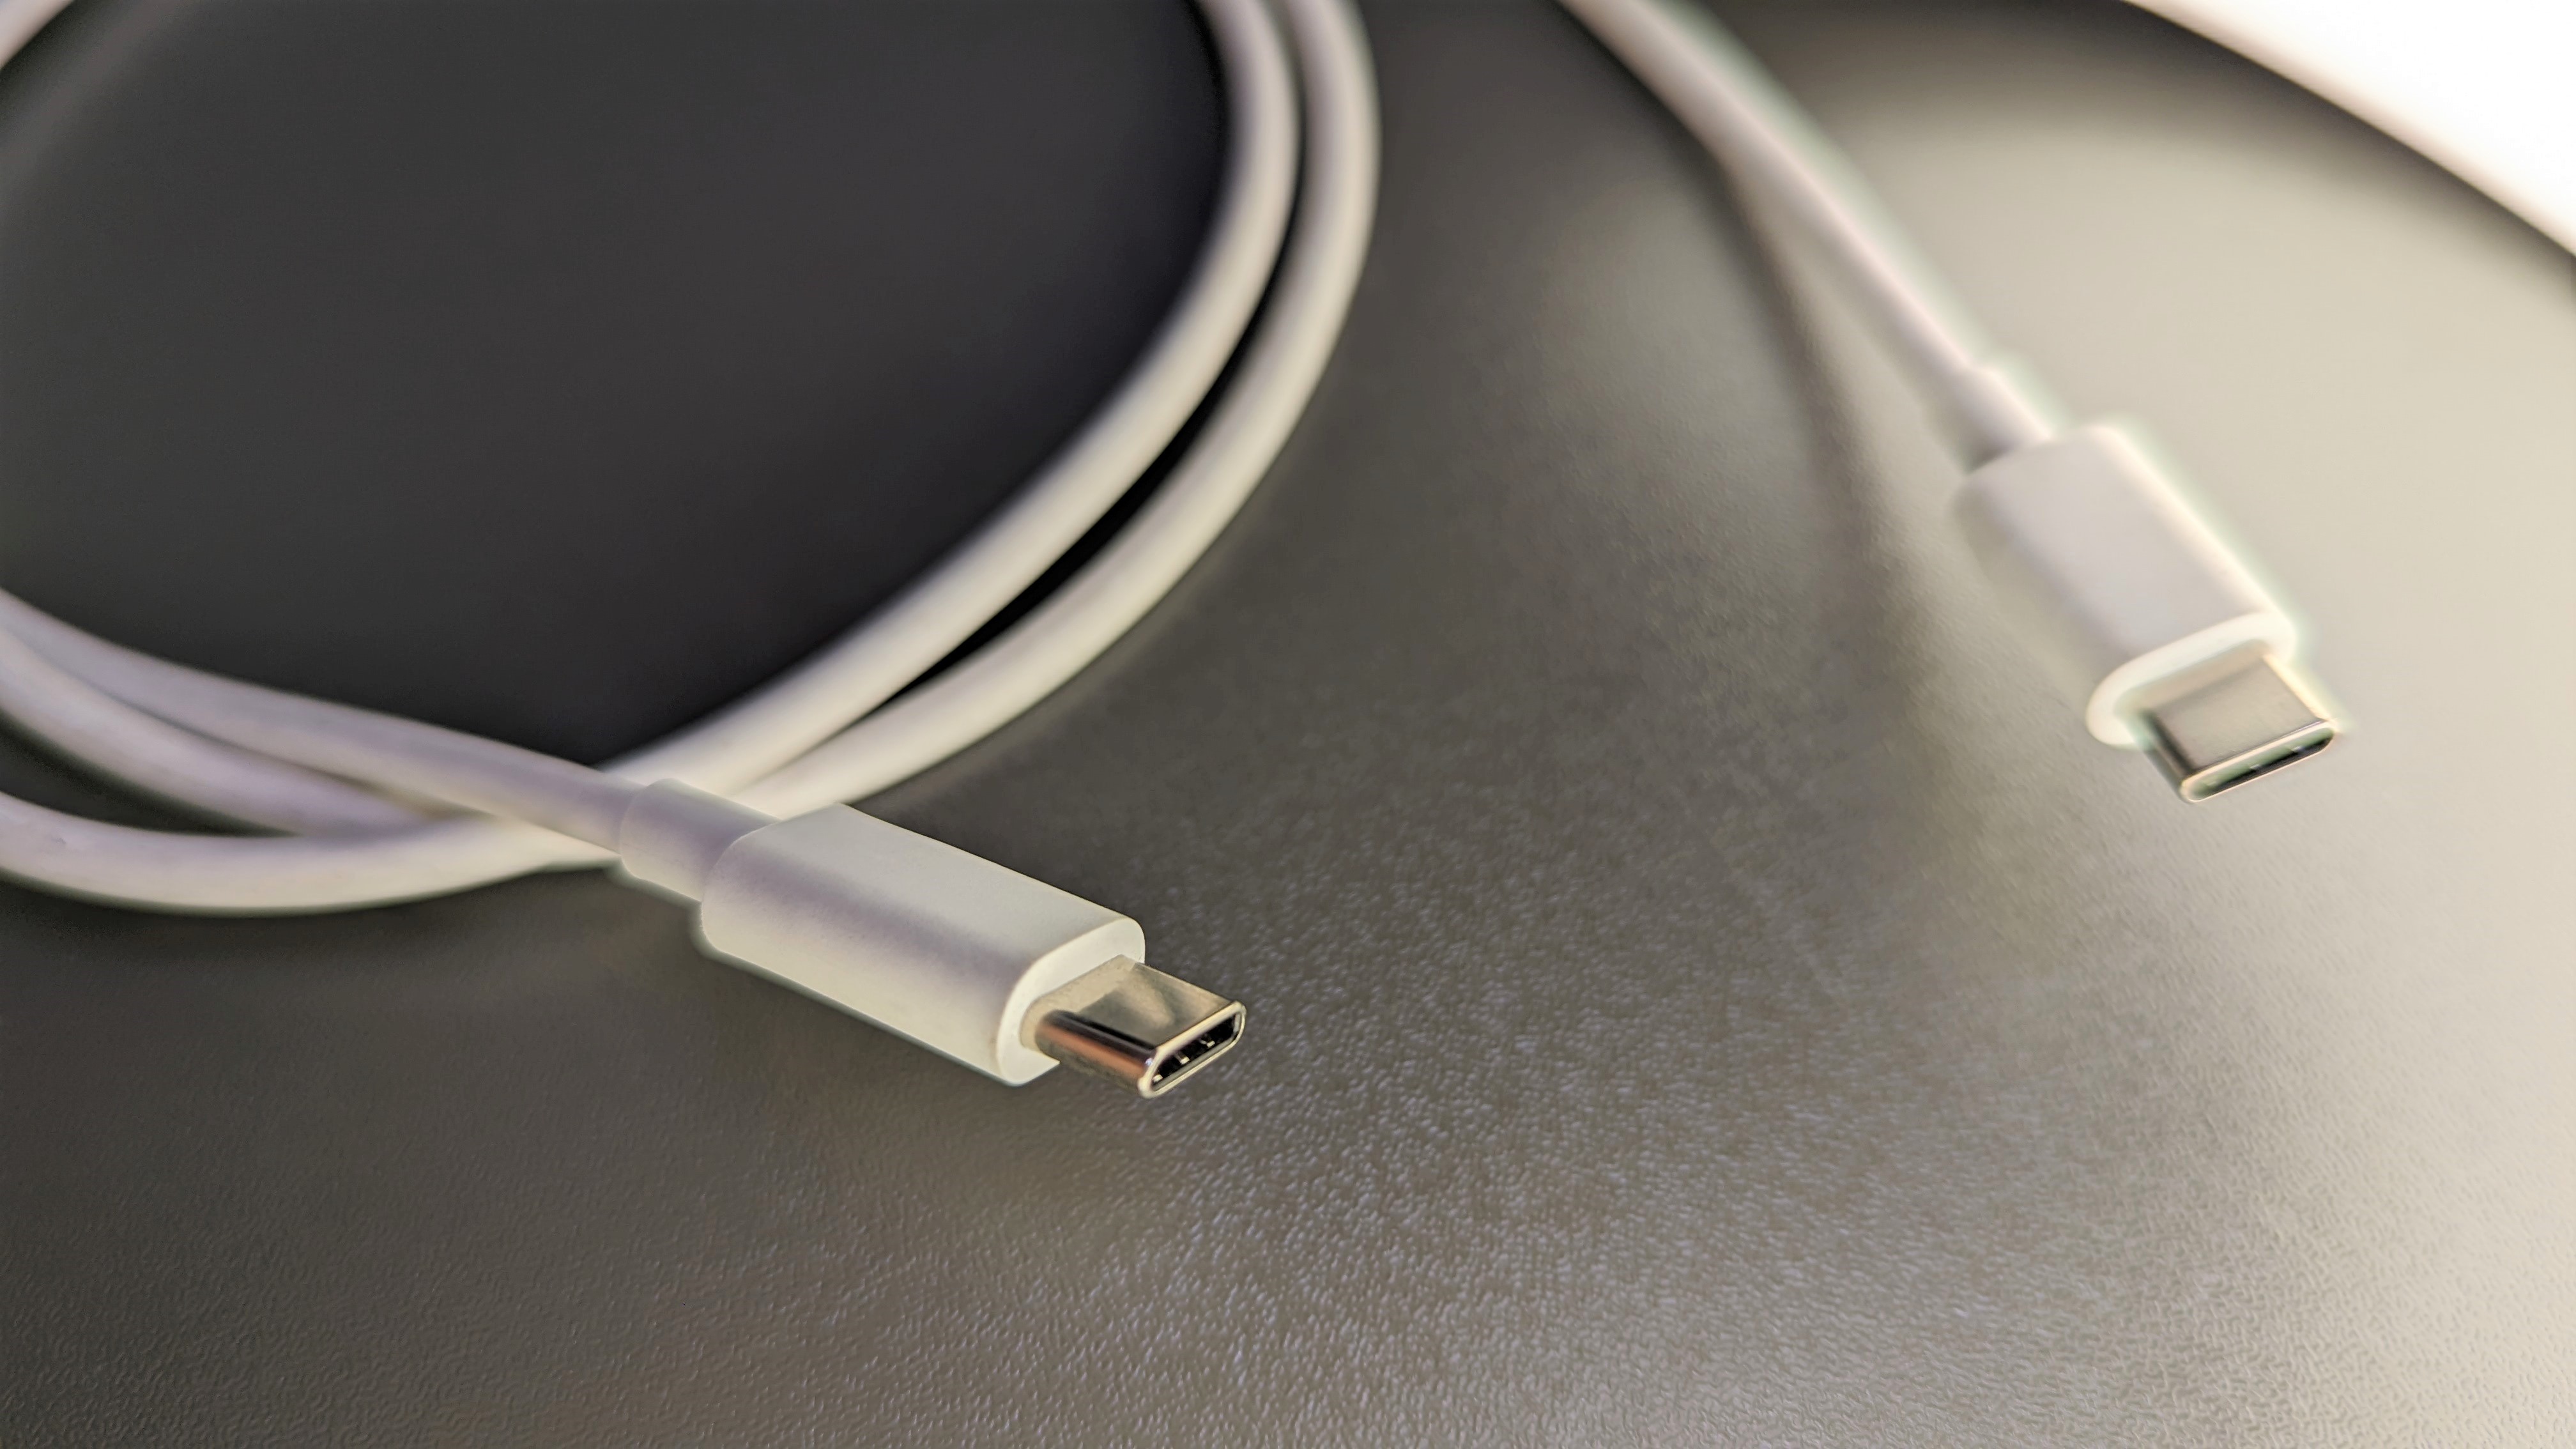 USB-C cable on a table